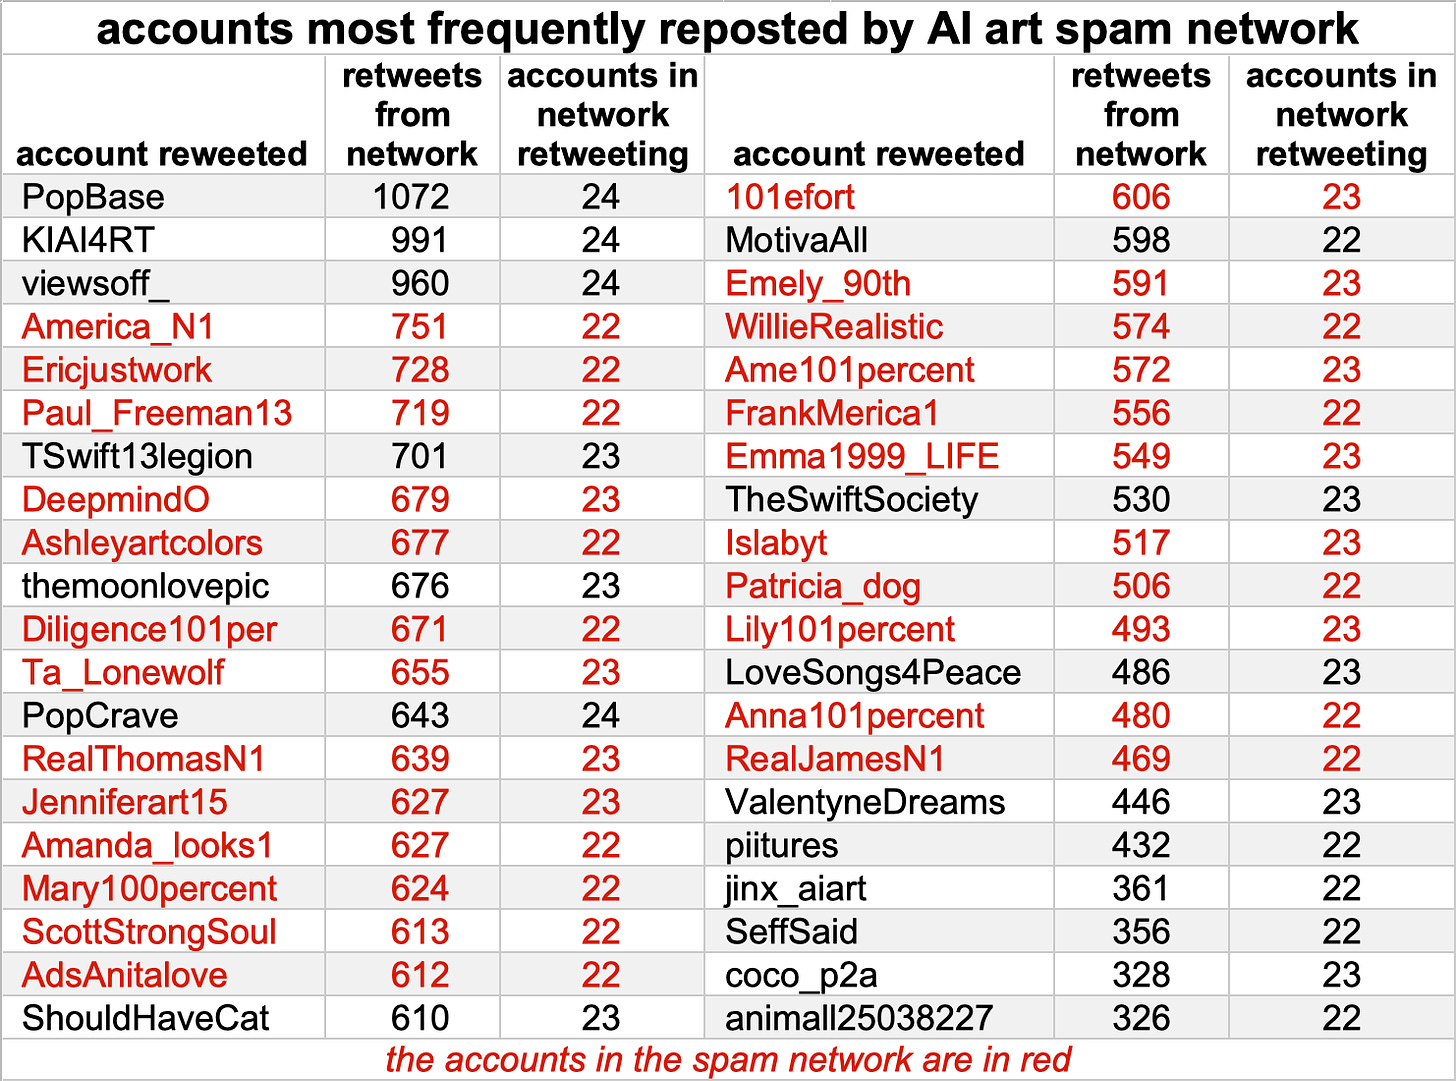 table of accounts most frequently reposted by the network